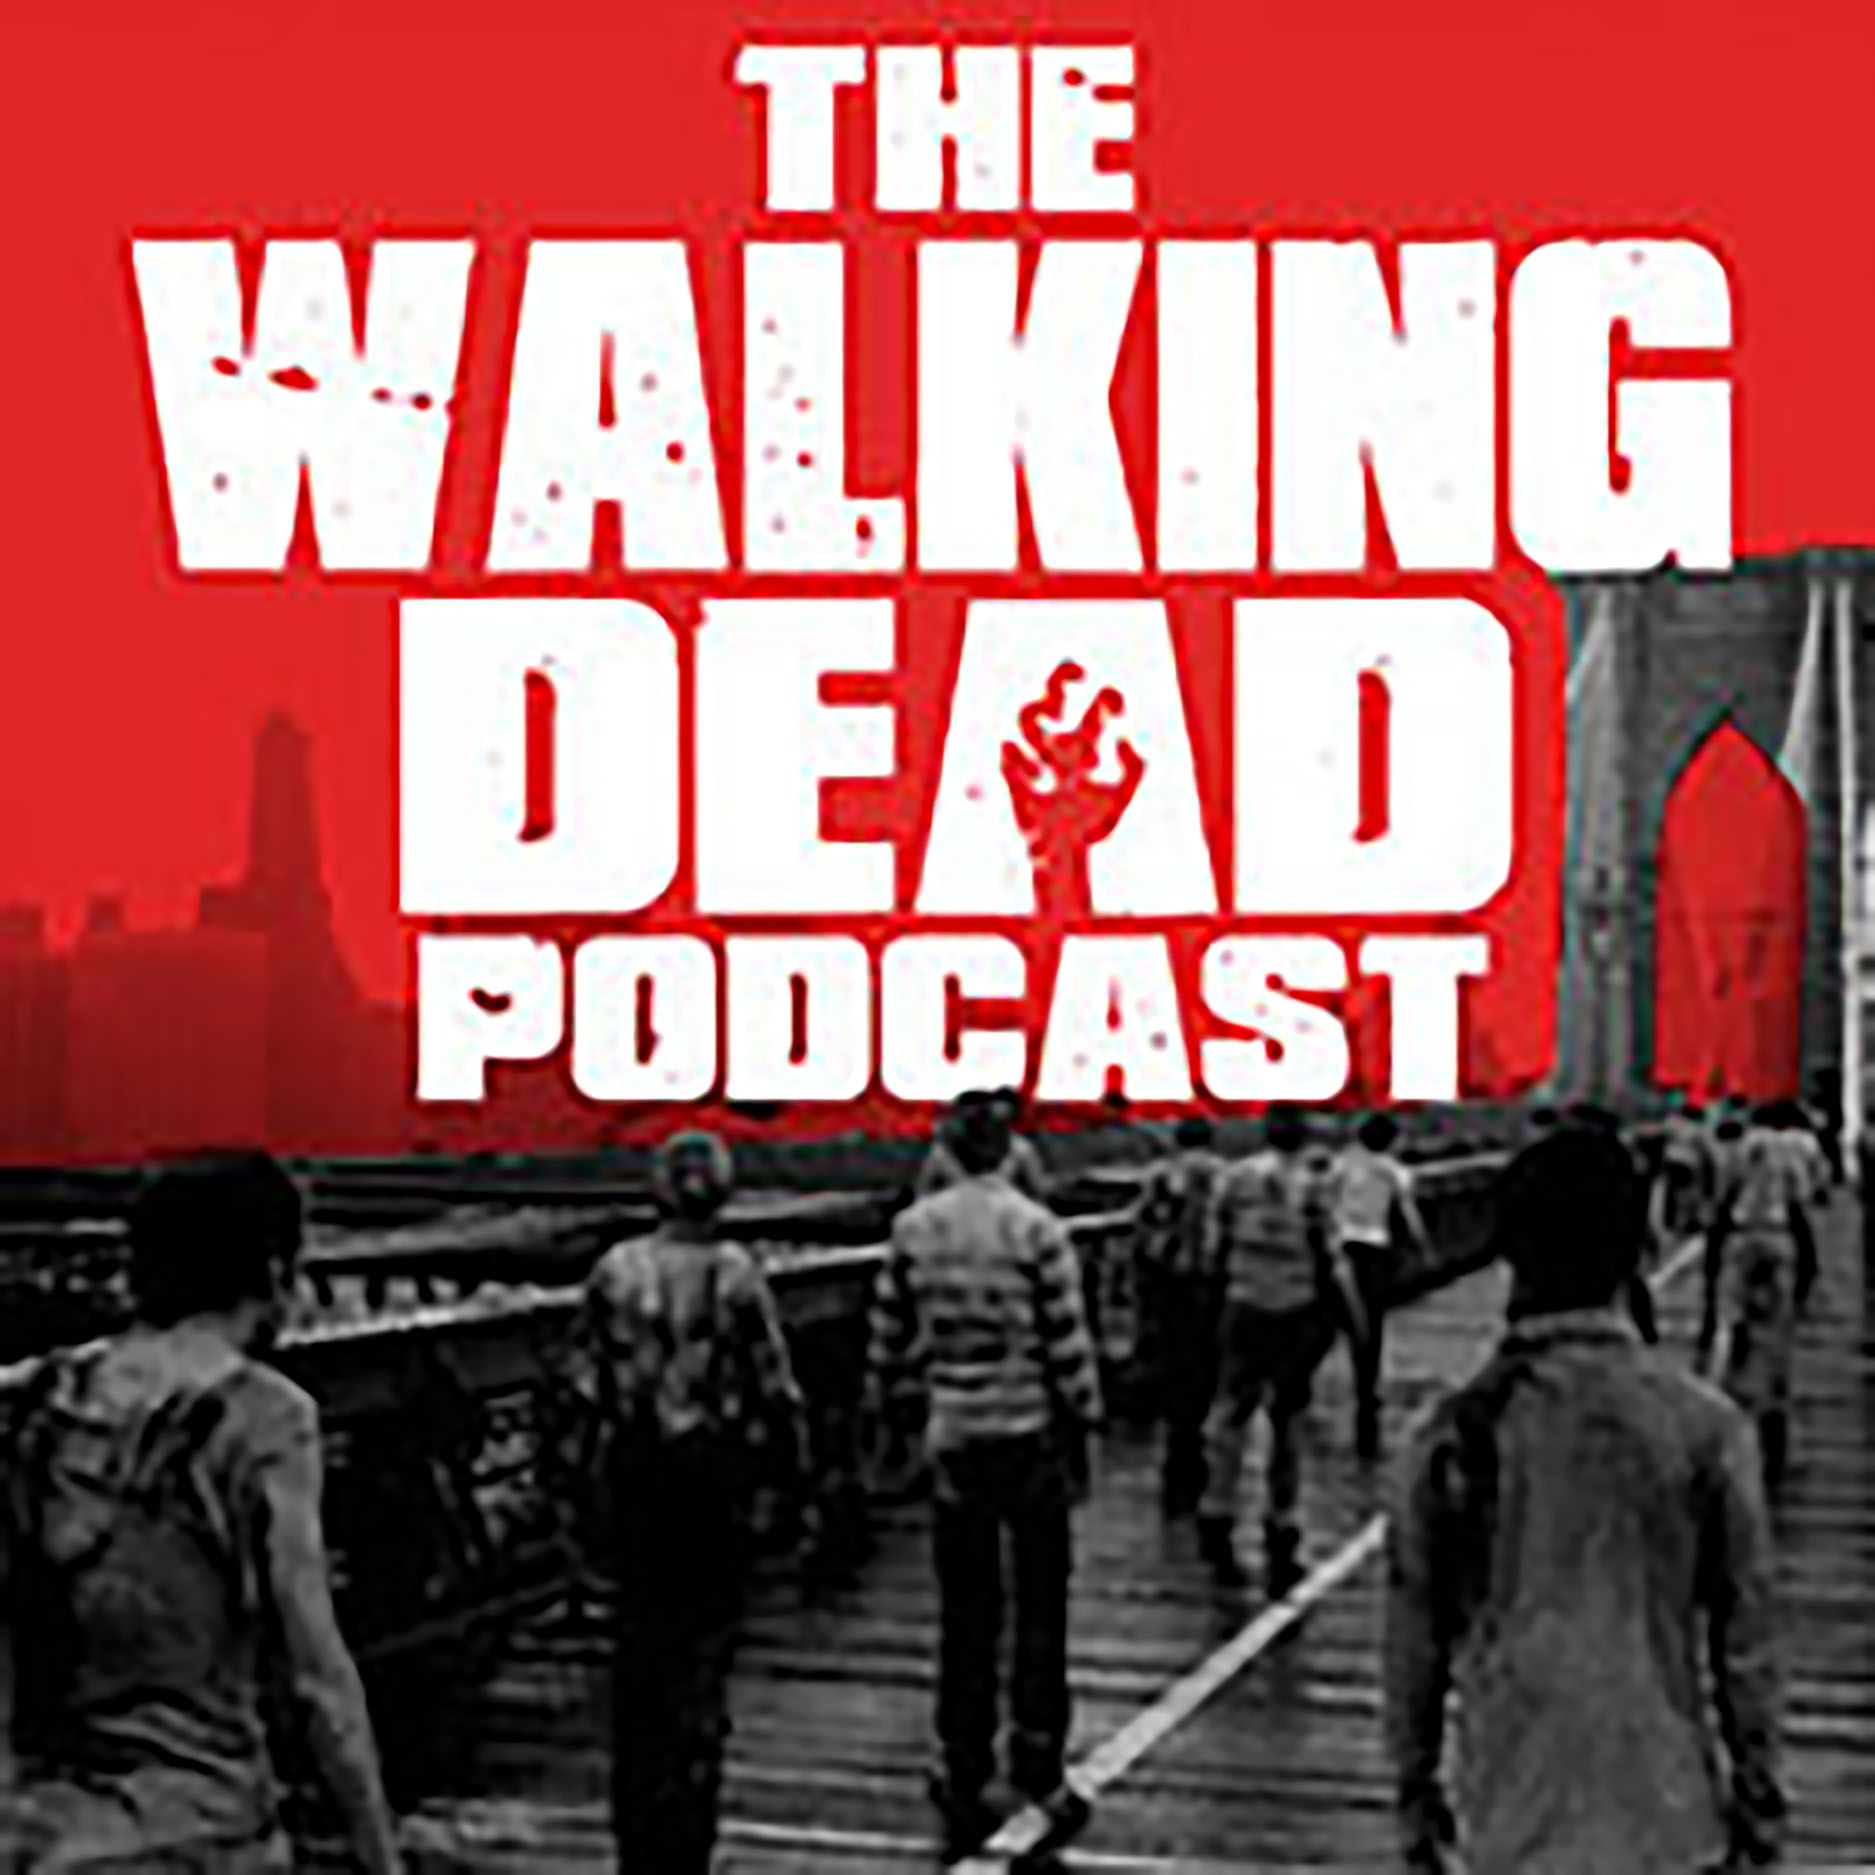 Stream The Walking Dead Podcast | Listen to podcast episodes online for  free on SoundCloud